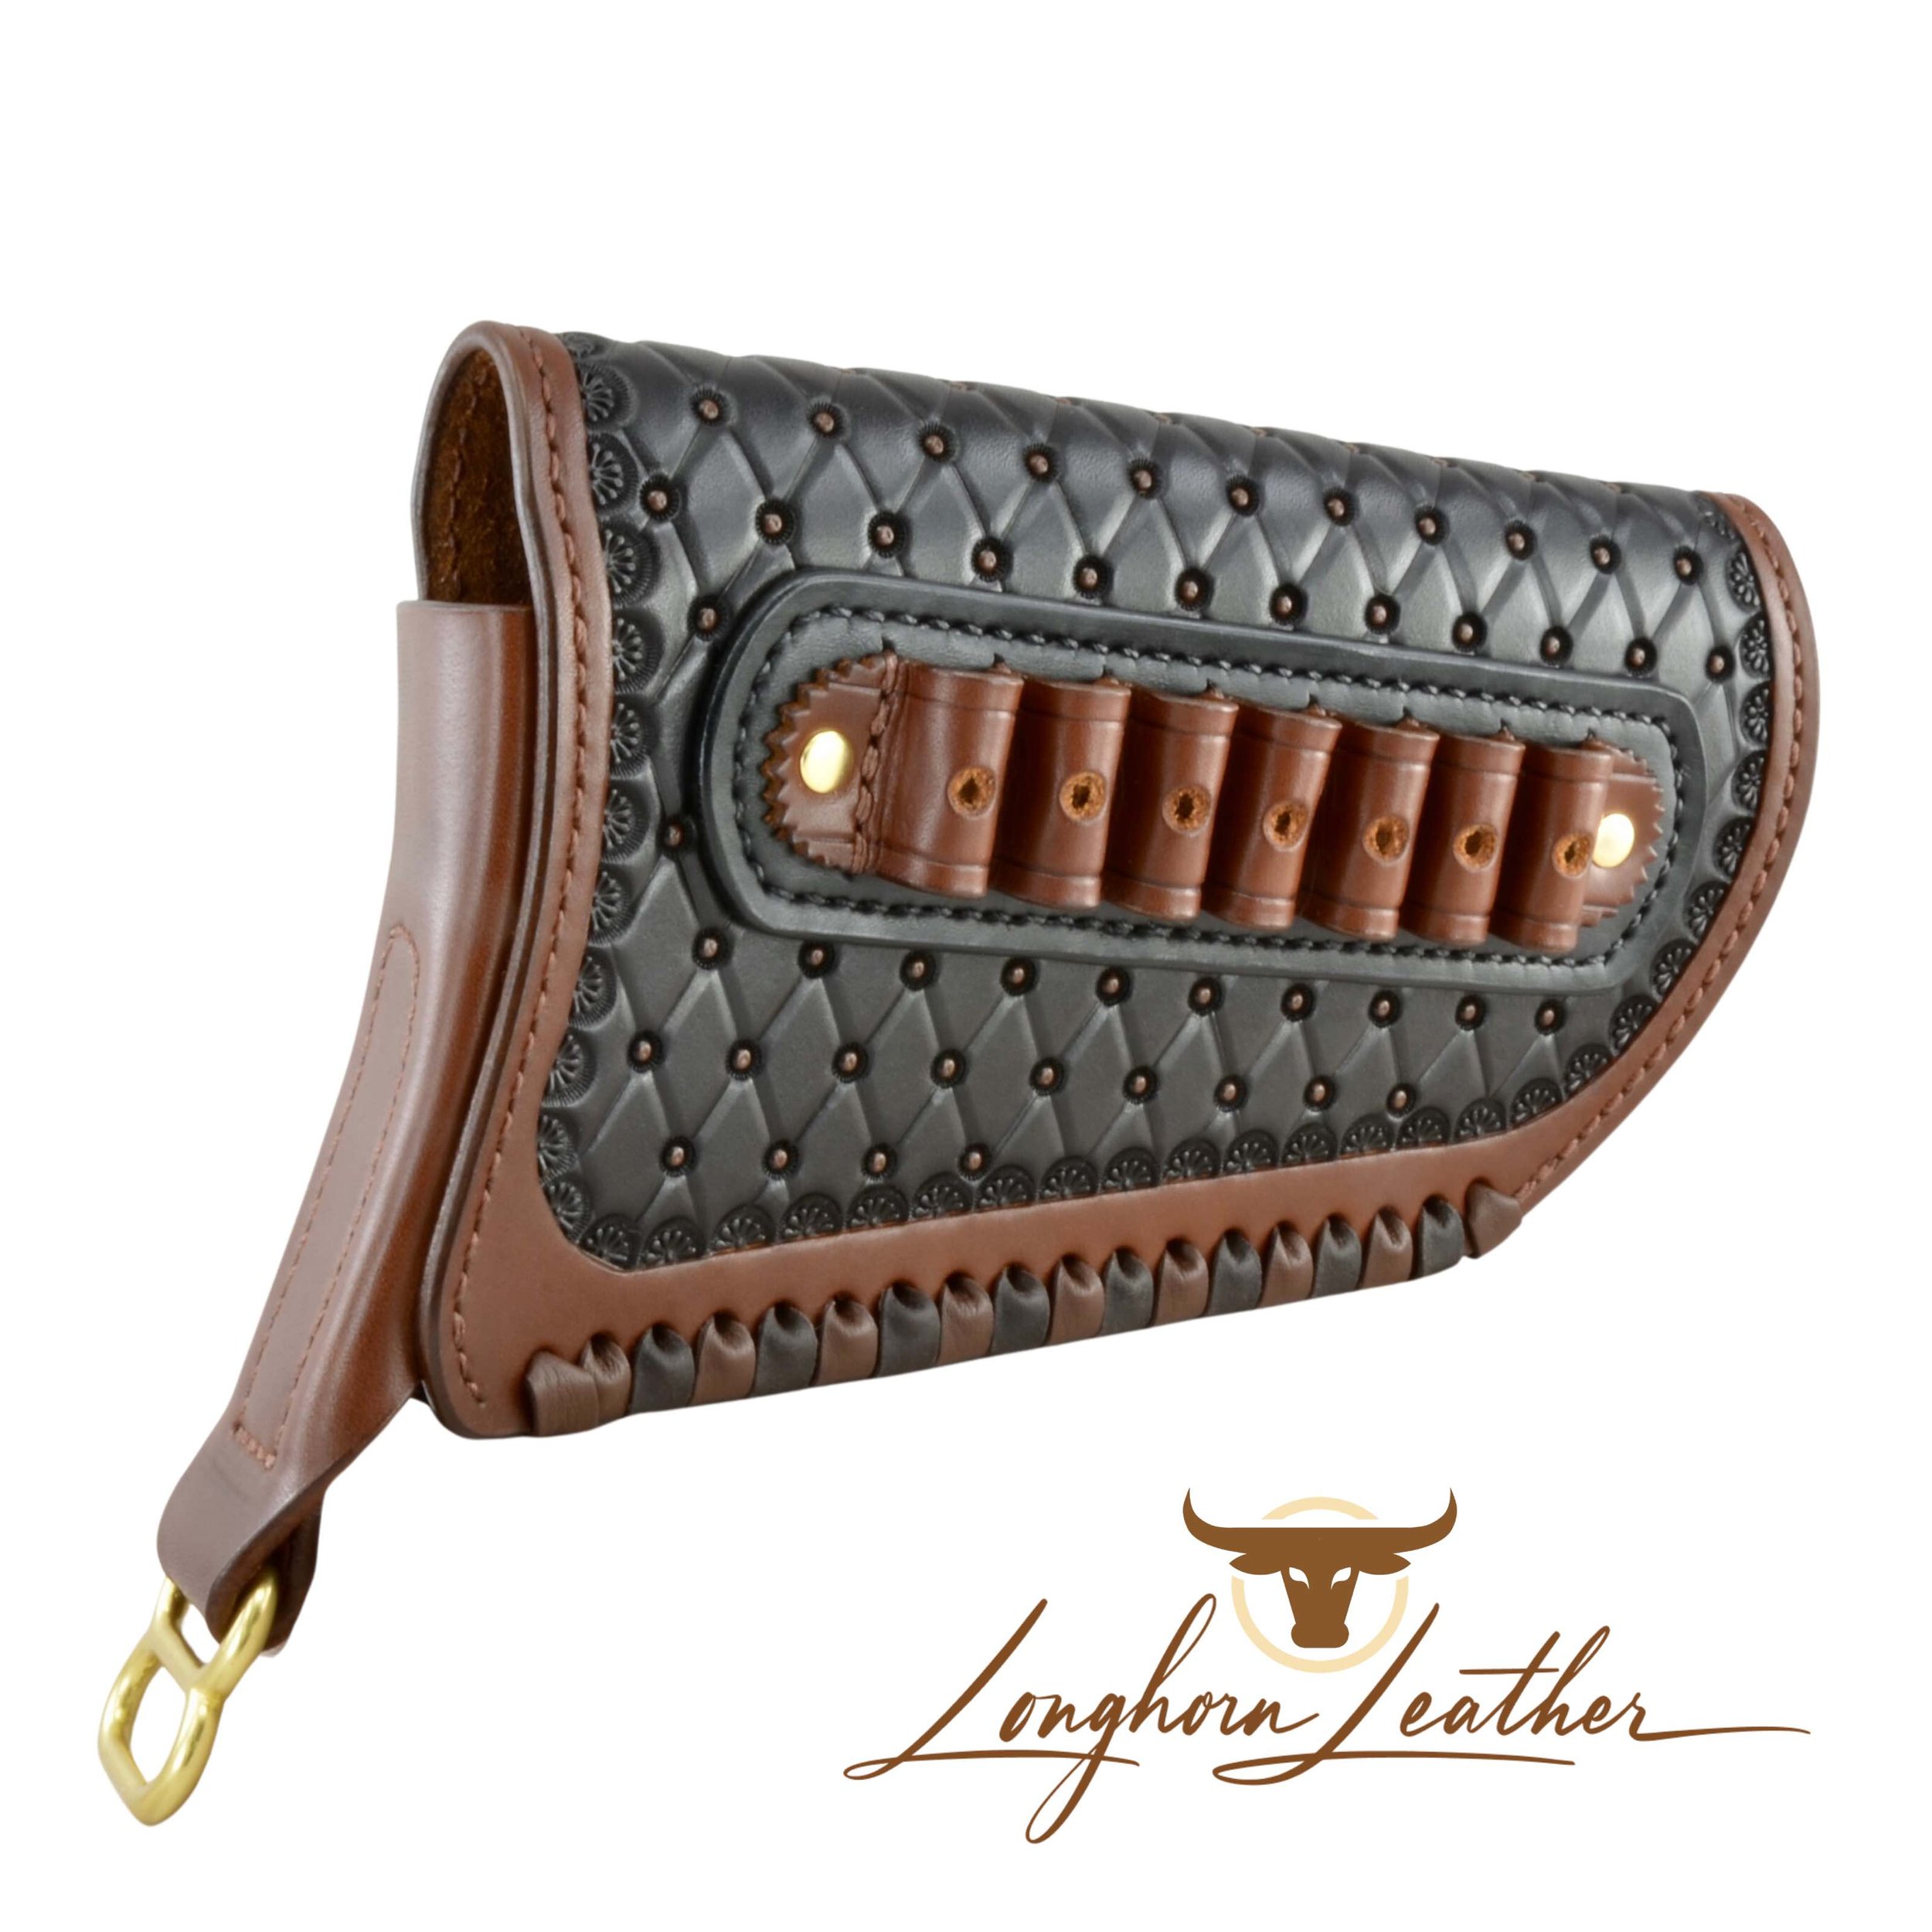 Custom leather gunstock cover featuring the San Carlos design.  Individually handcrafted at Longhorn Leather AZ